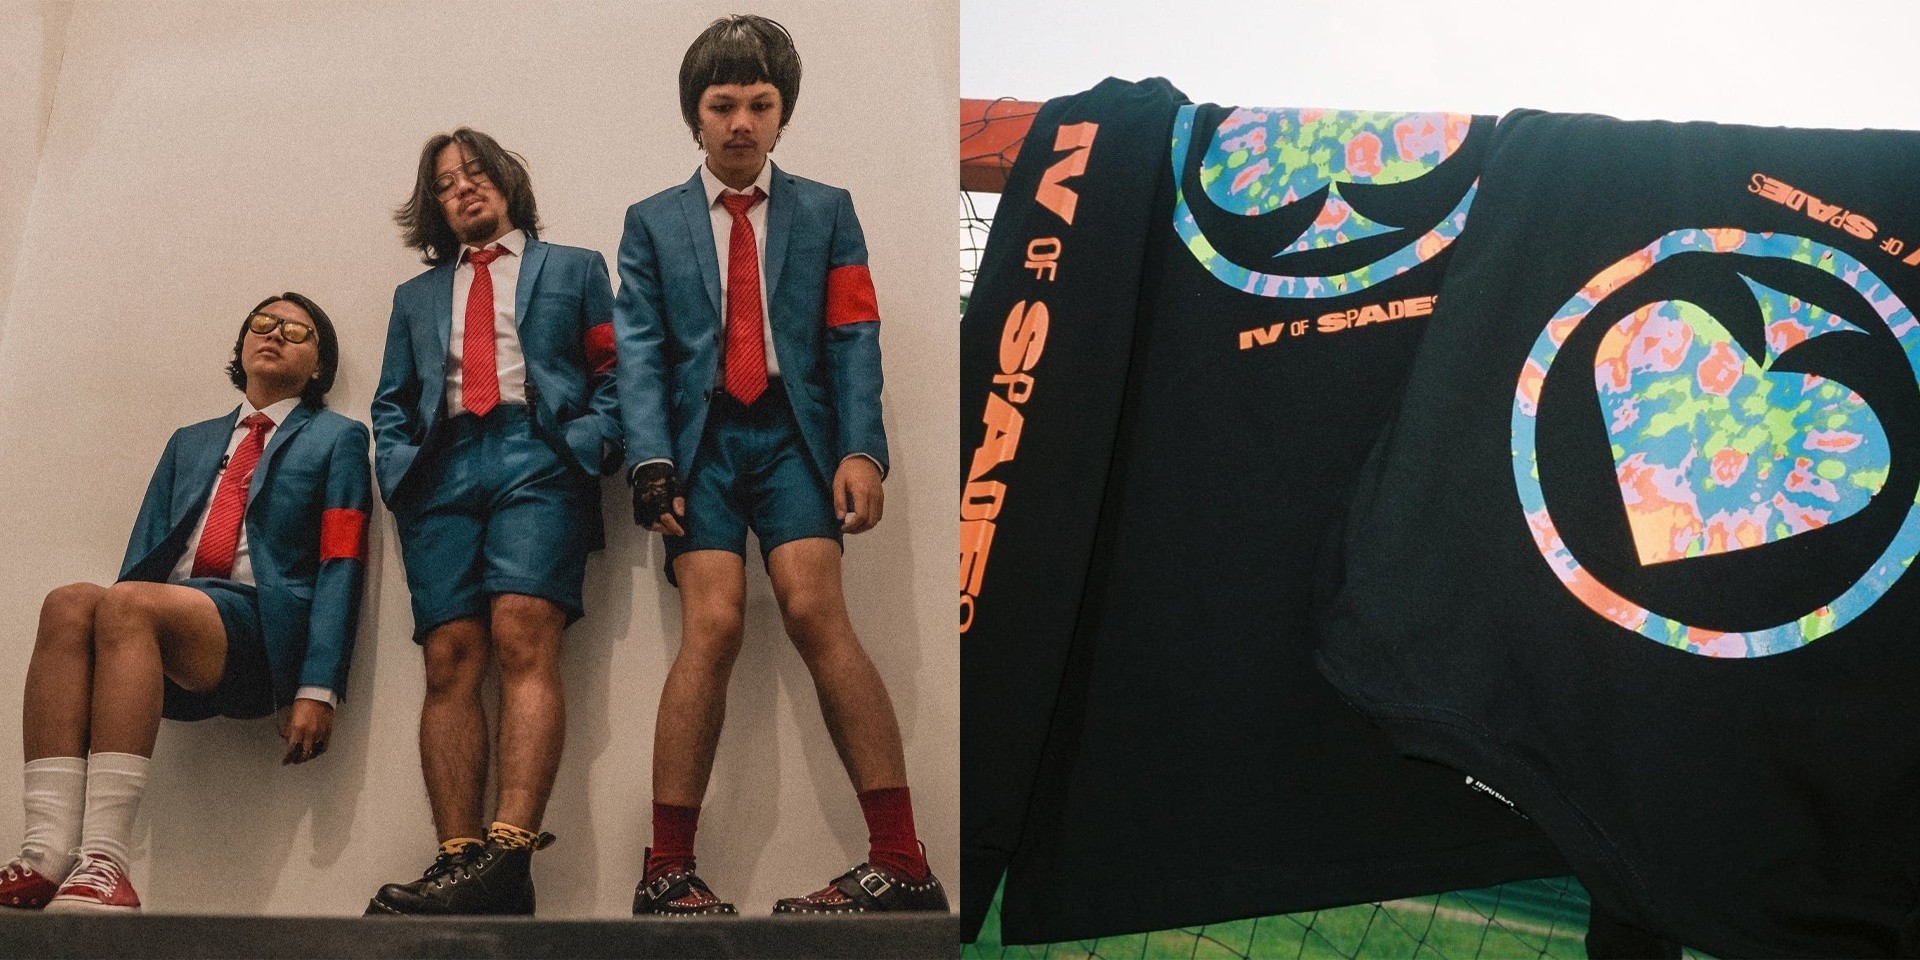 IV Of Spades collaborate with Team Manila for limited edition merch